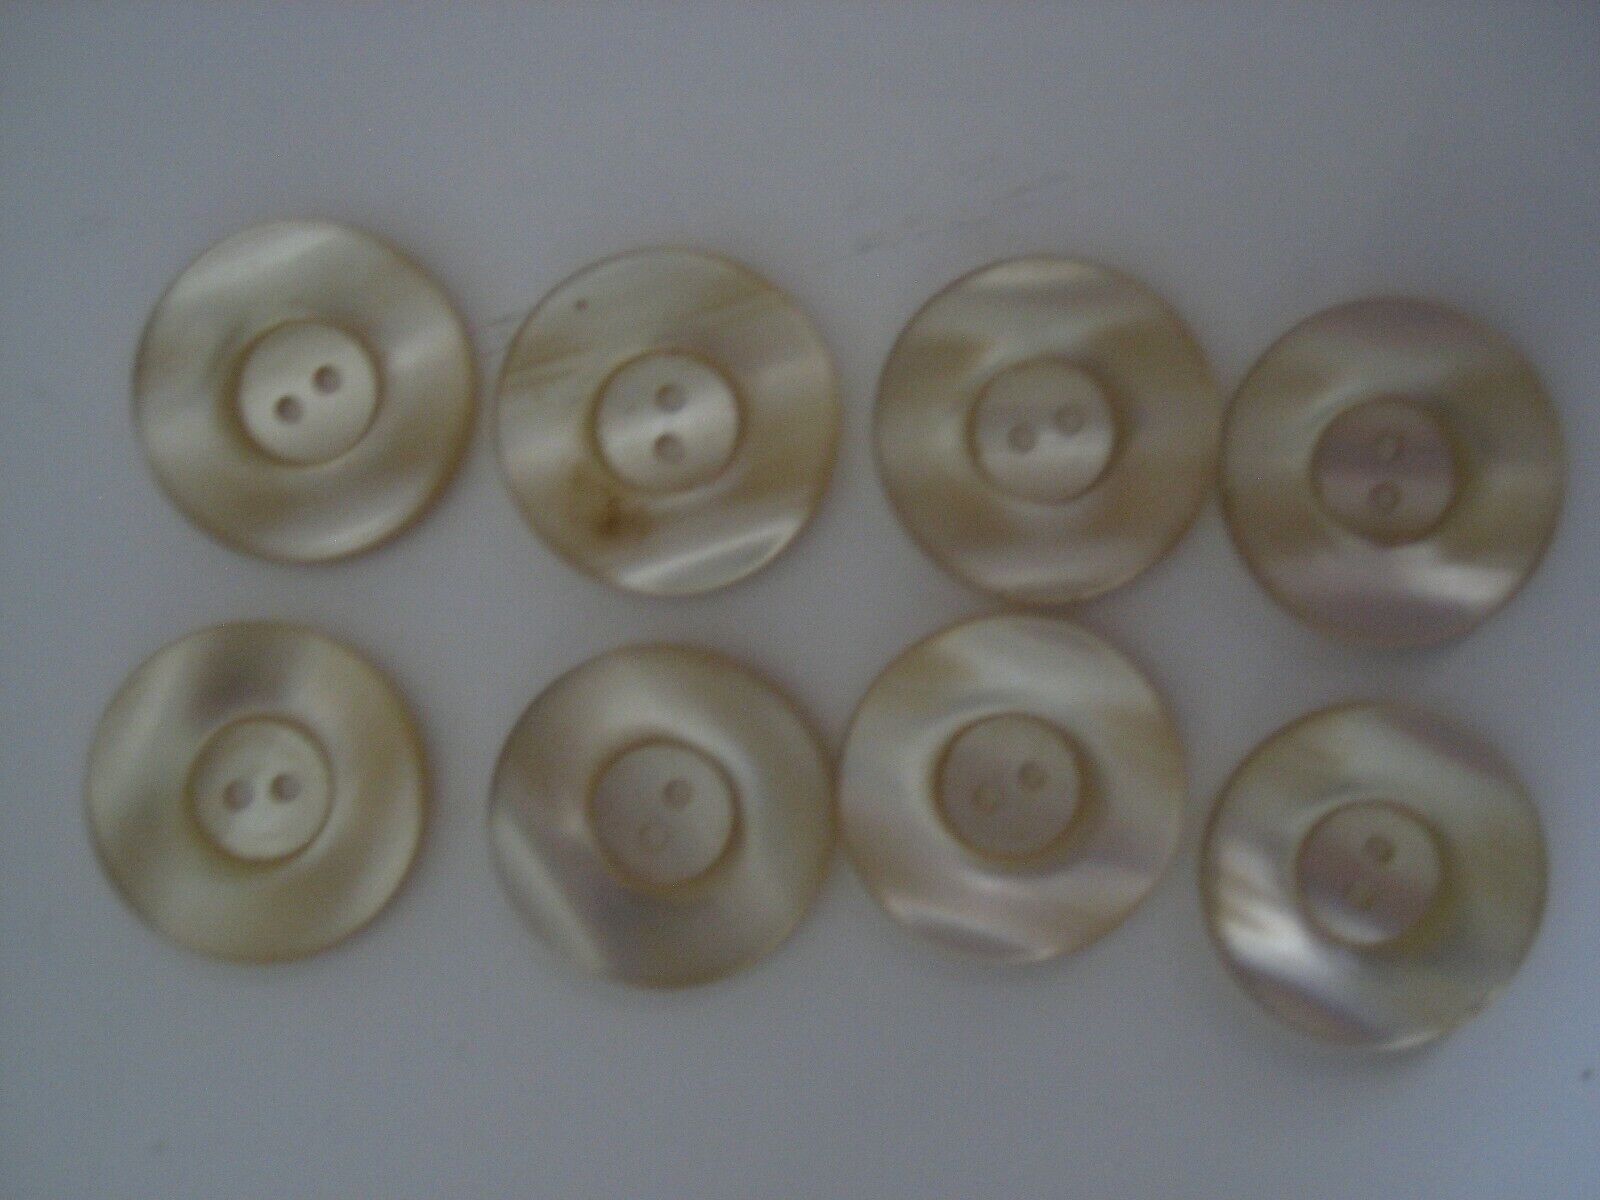 Vintage Pale Yellow Buttons 2 HOLES Depressed Center 1.25